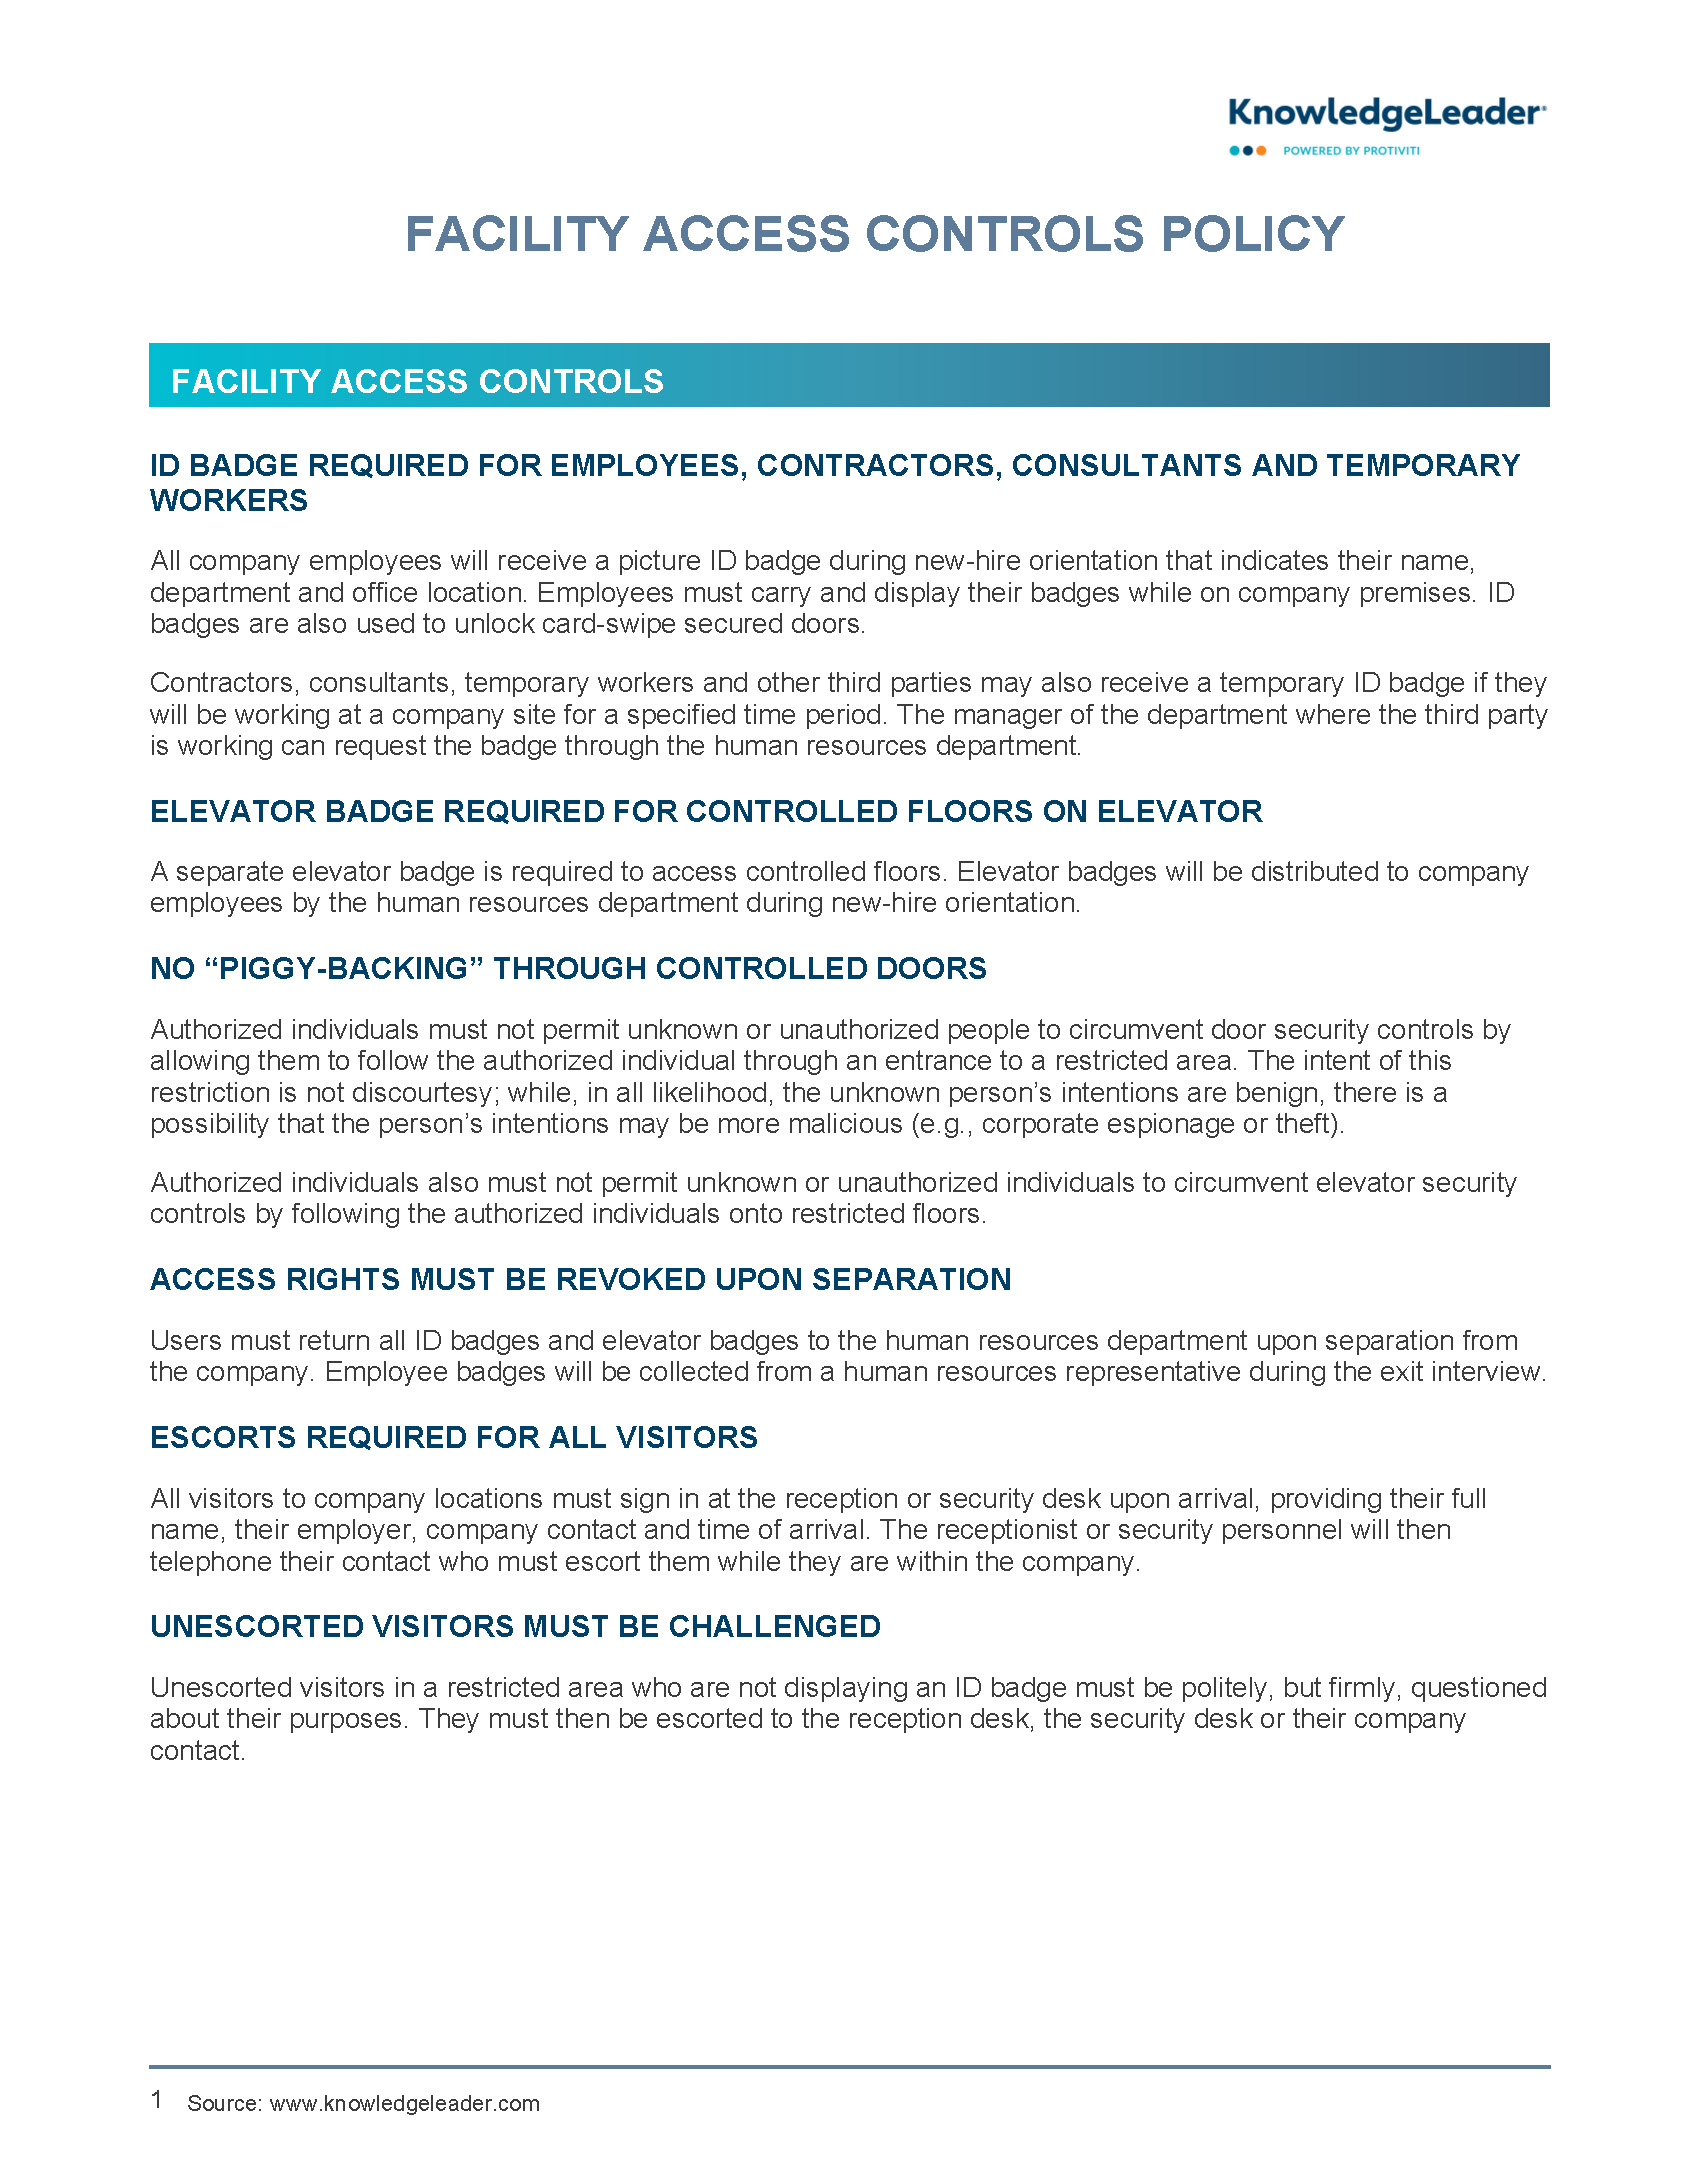 Screenshot of the first page of Facility Access Controls Policy